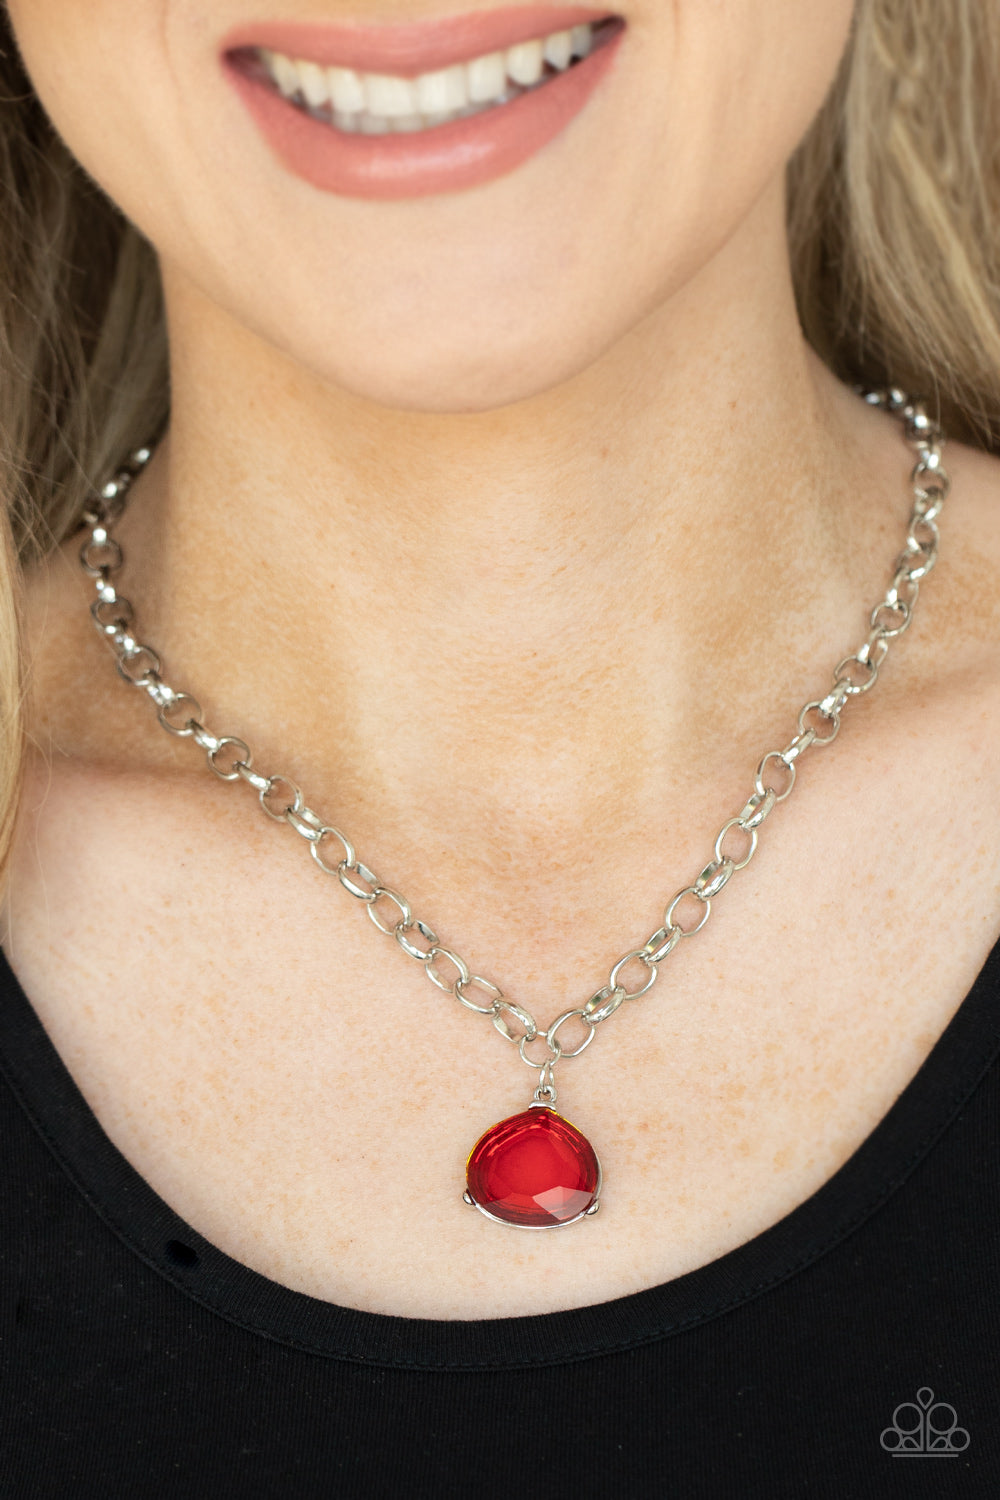 Gallery Gem Red Necklace - Paparazzi Accessories  An oversized glassy red gem is pressed into a pronged silver fitting at the bottom of a chunky silver chain, creating a dramatic pendant below the collar. Features an adjustable clasp closure.  All Paparazzi Accessories are lead free and nickel free!  Sold as one individual necklace. Includes one pair of matching earrings.